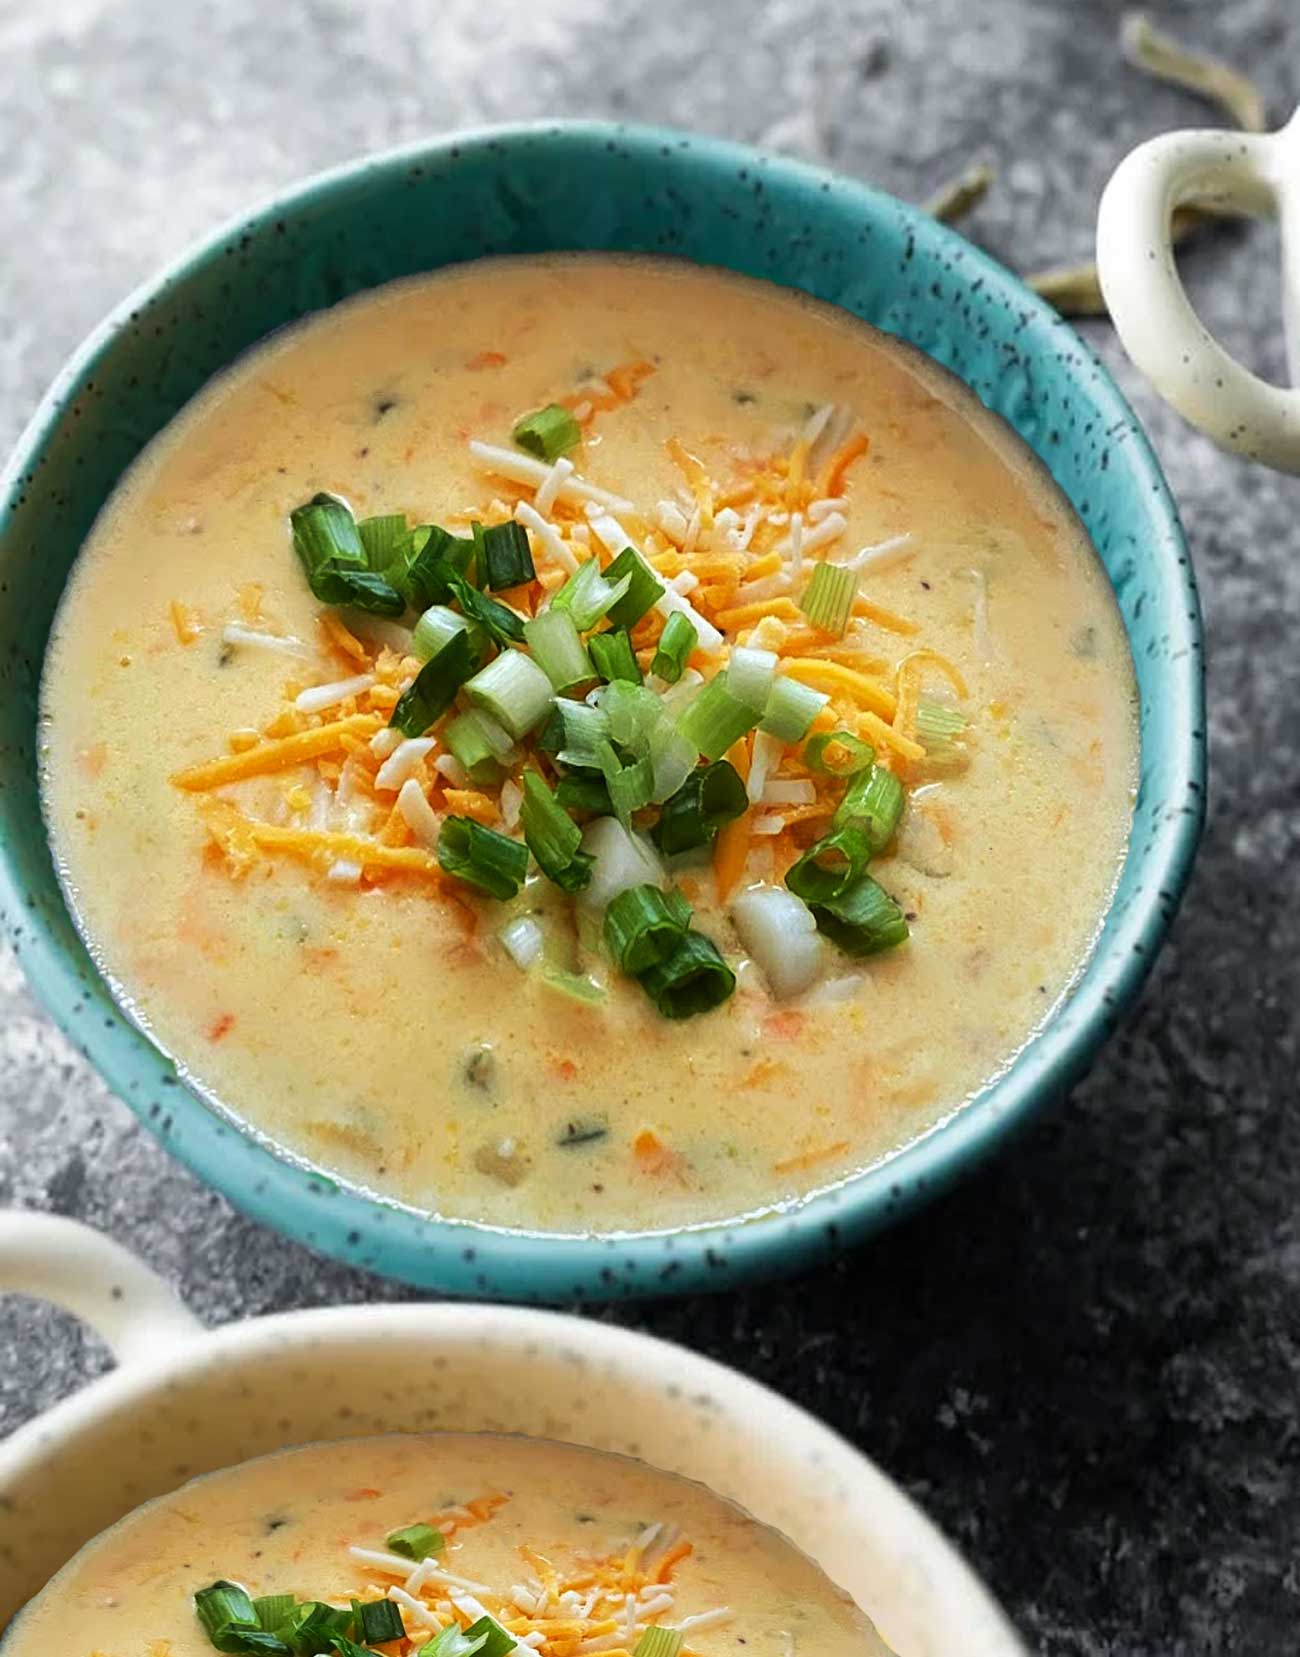 Hot cheddar cheese soup on a cold day